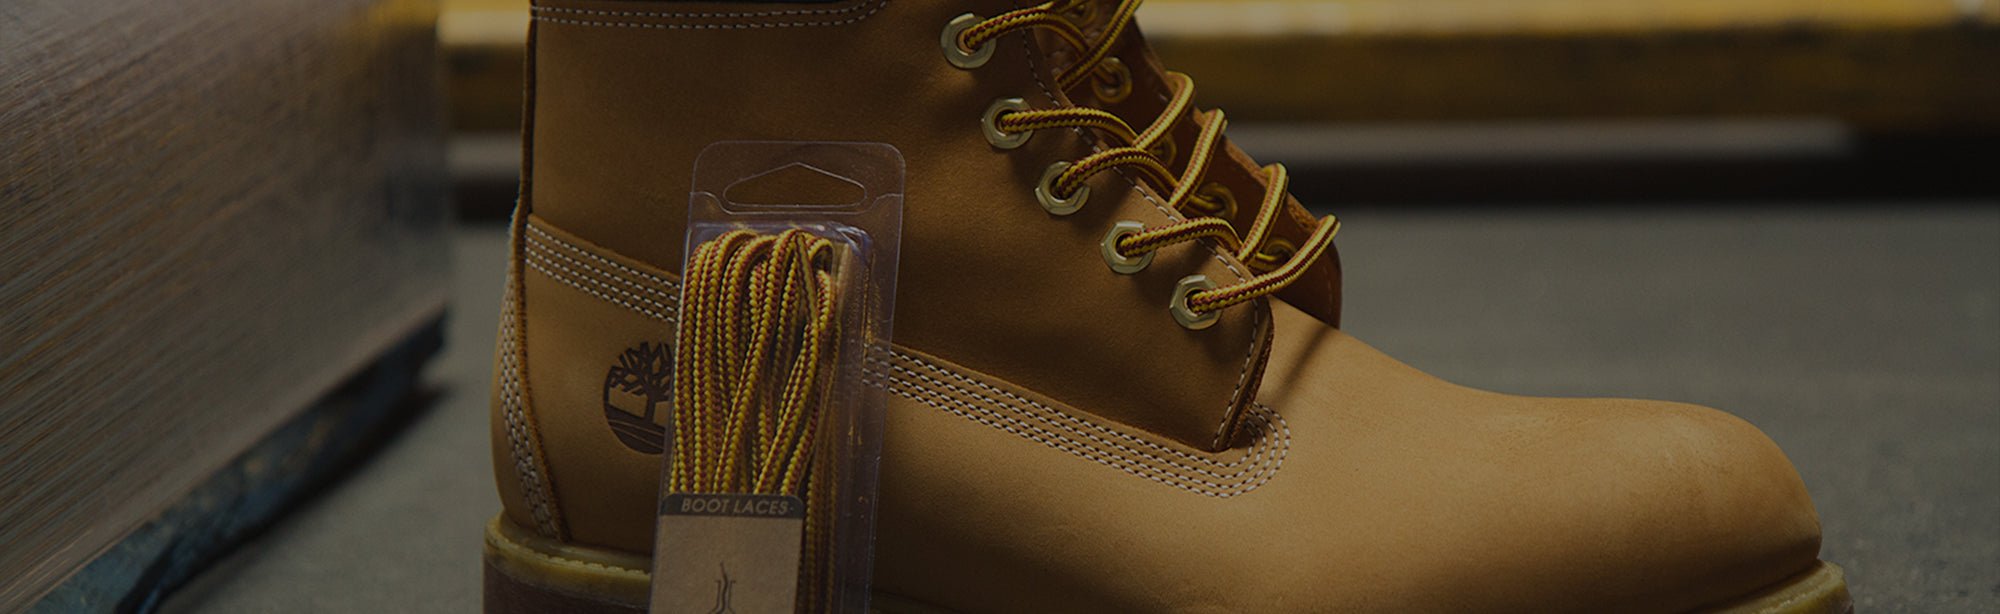 Boot Laces - Angelus Direct 